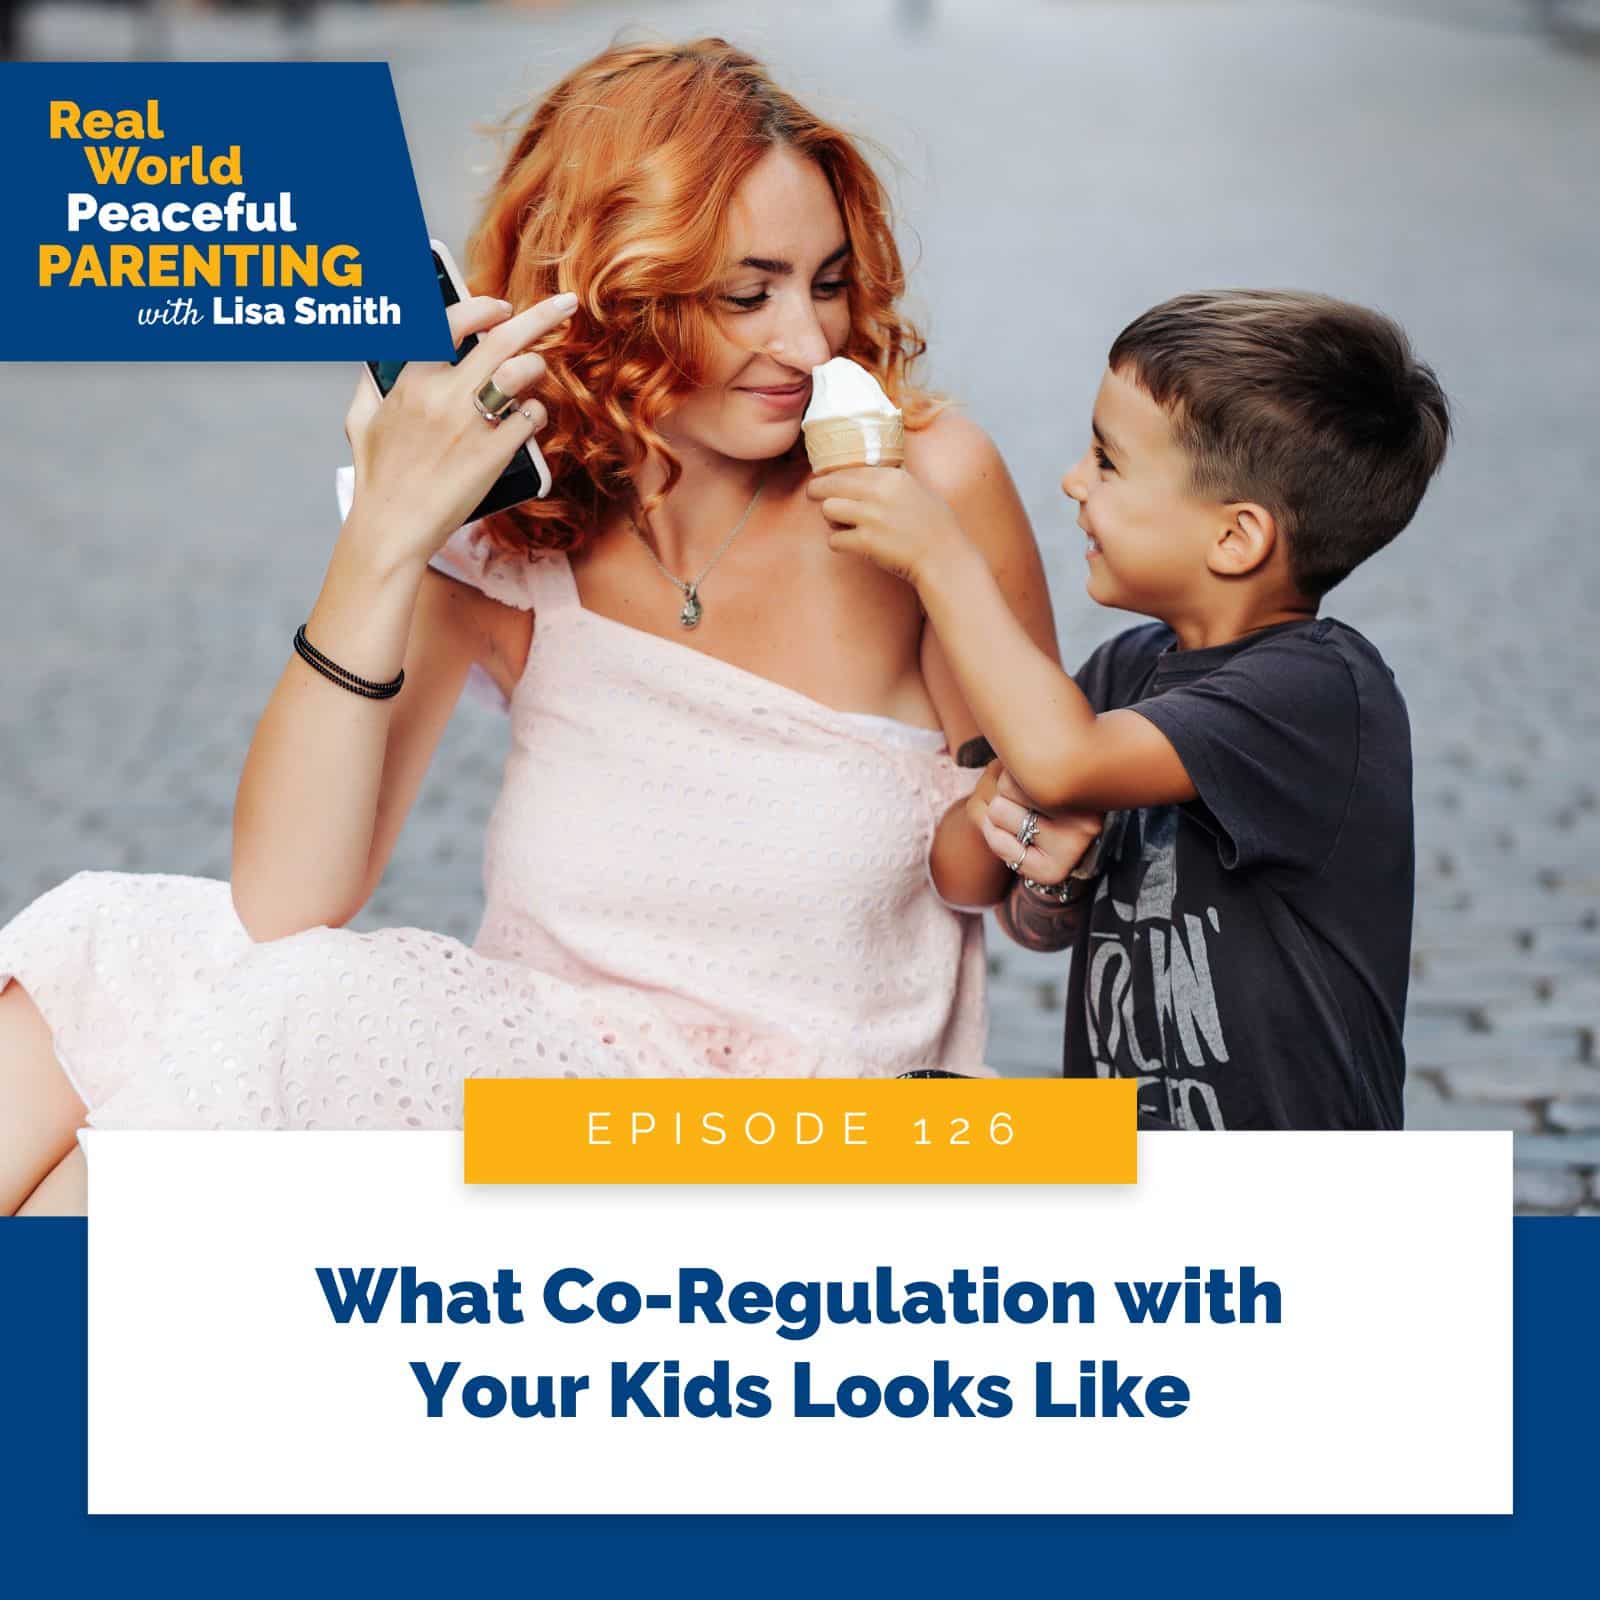 Real World Peaceful Parenting Lisa Smith | What Co-Regulation with Your Kids Looks Like